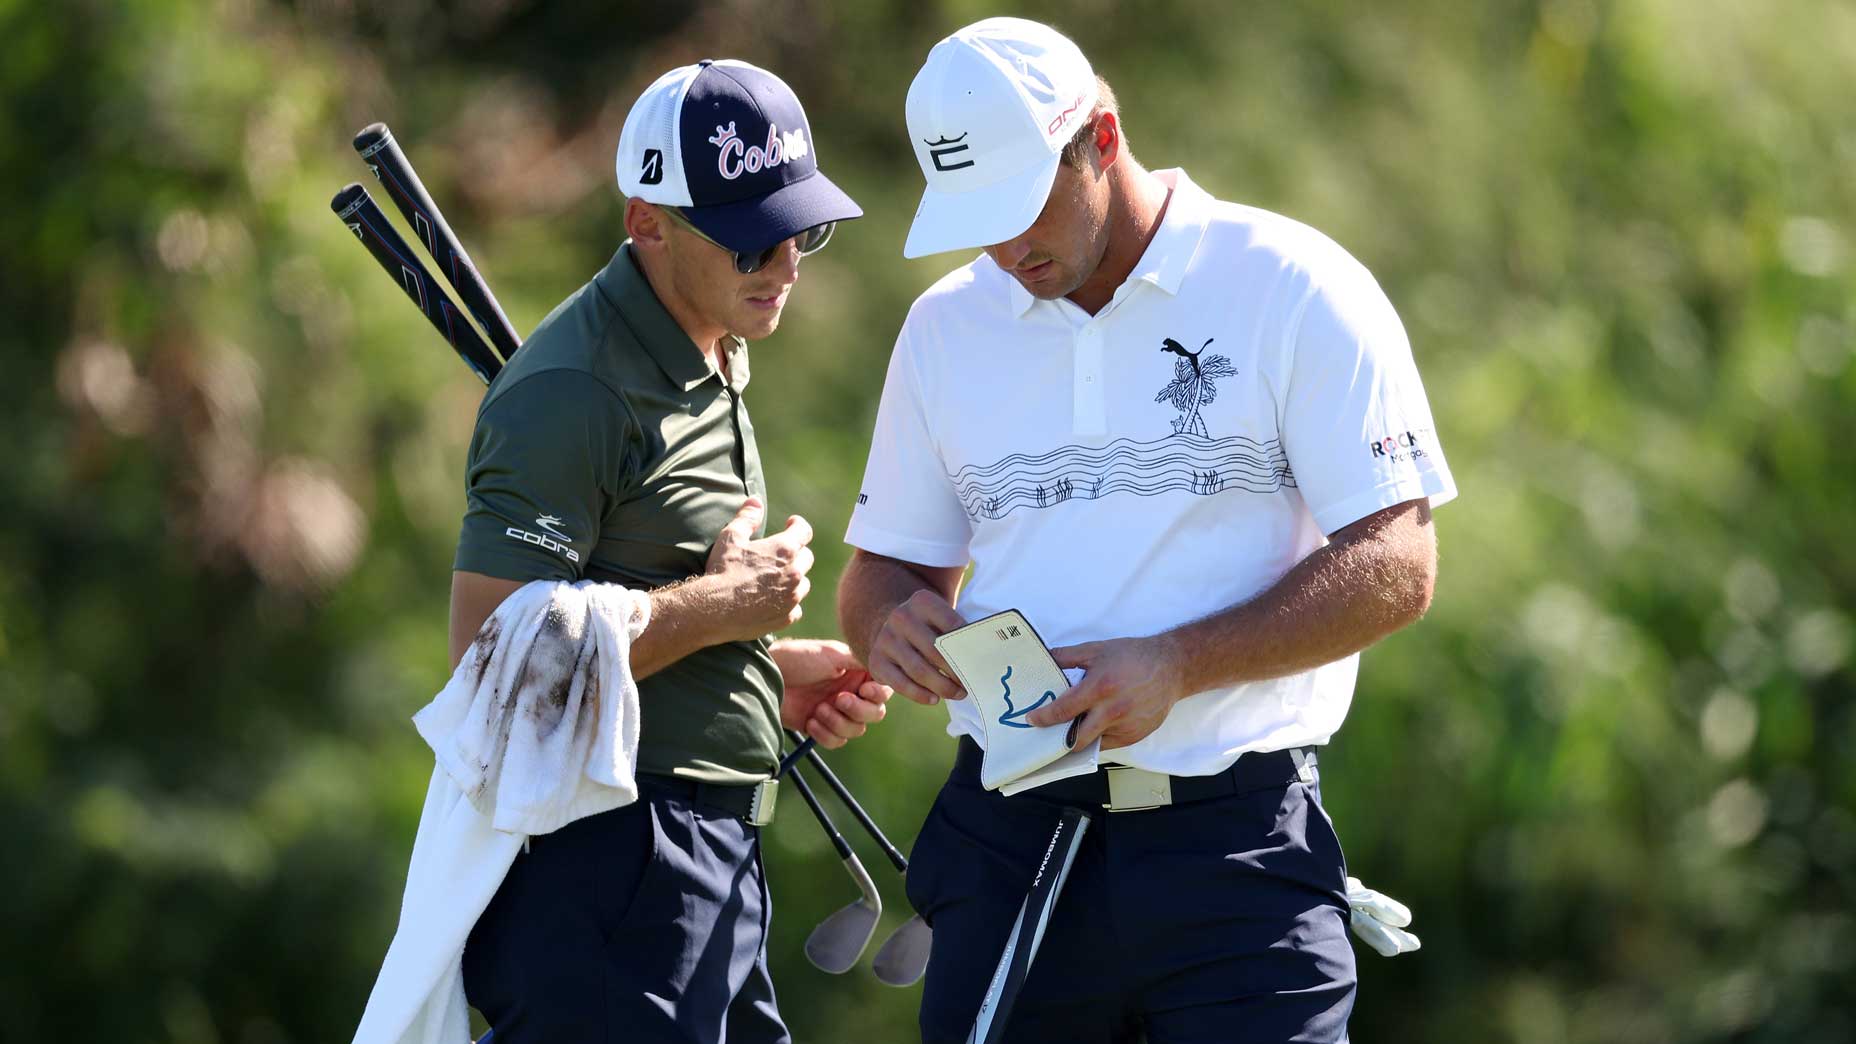 Why do golfers carry a notepad?